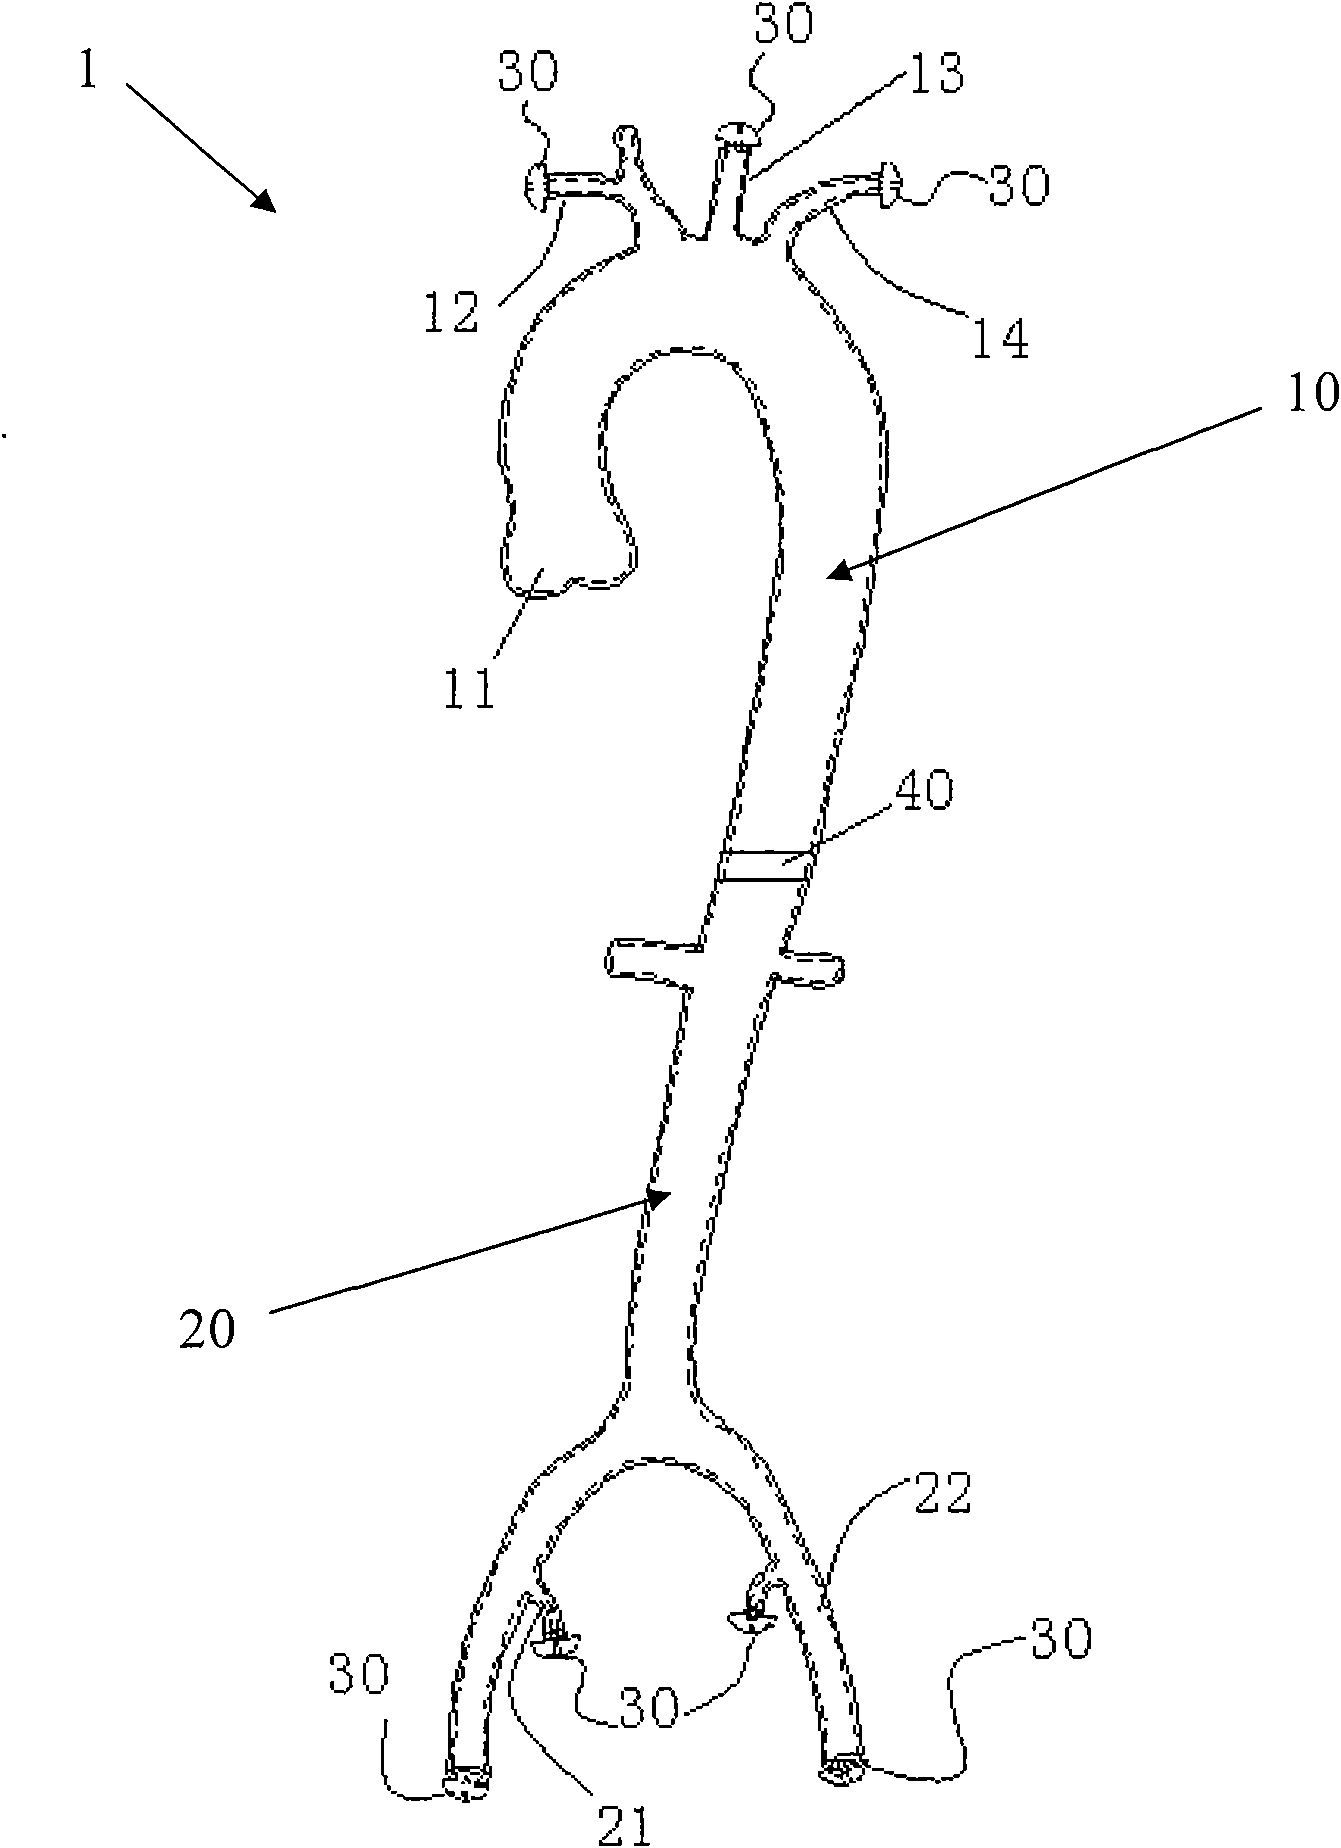 Blood vessel model and blood circulation simulating device using same